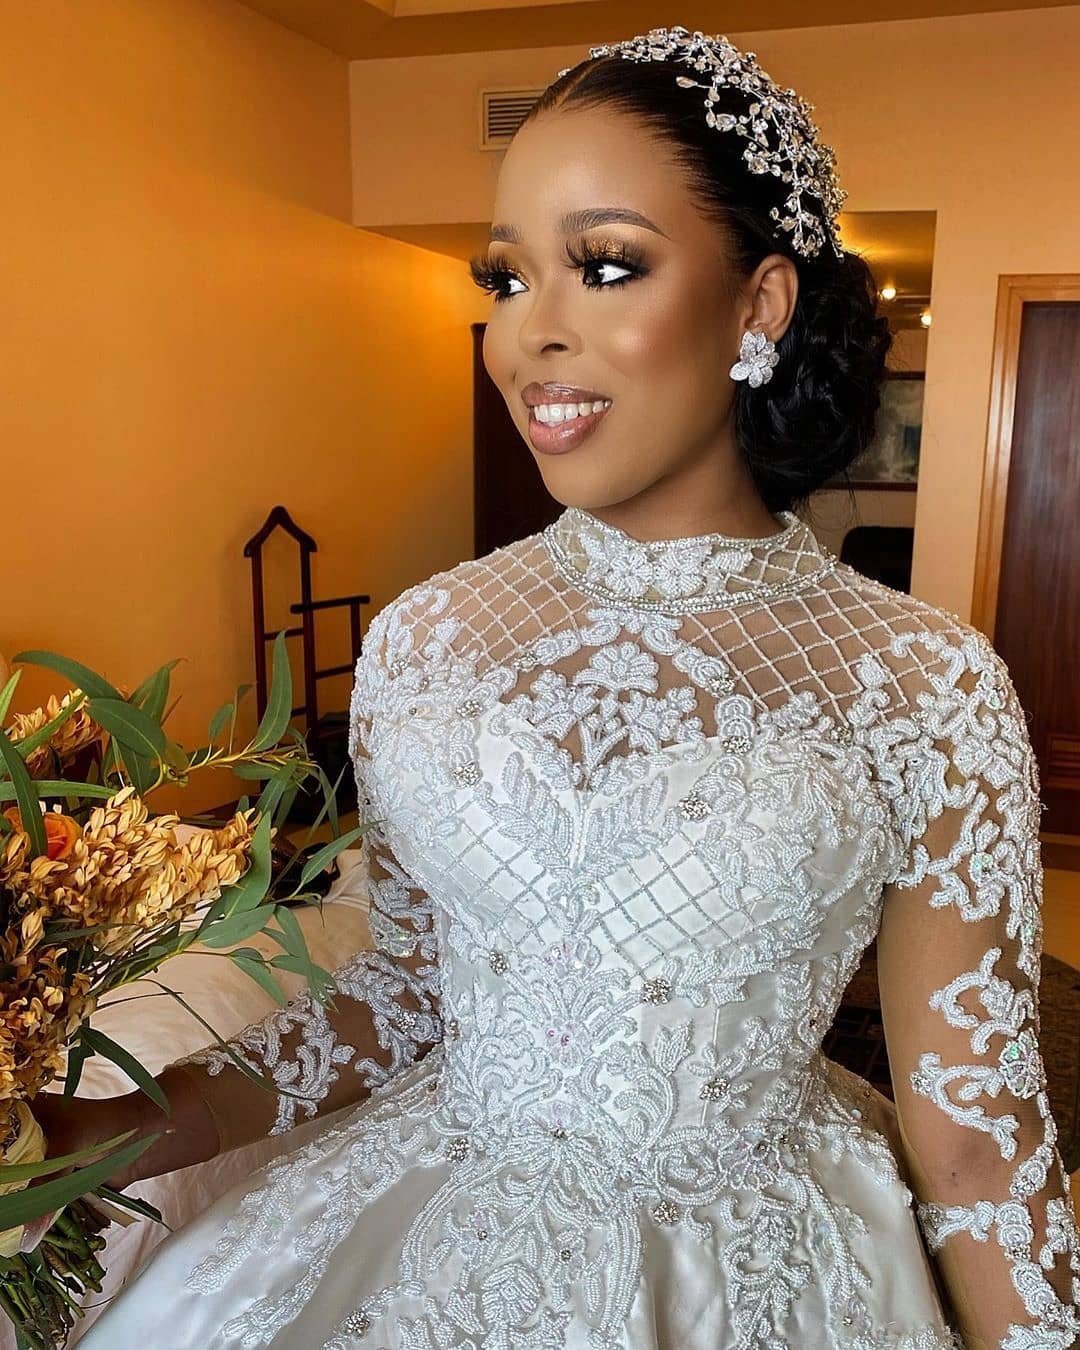 Uwaha was an Absolute Beauty for her White Wedding